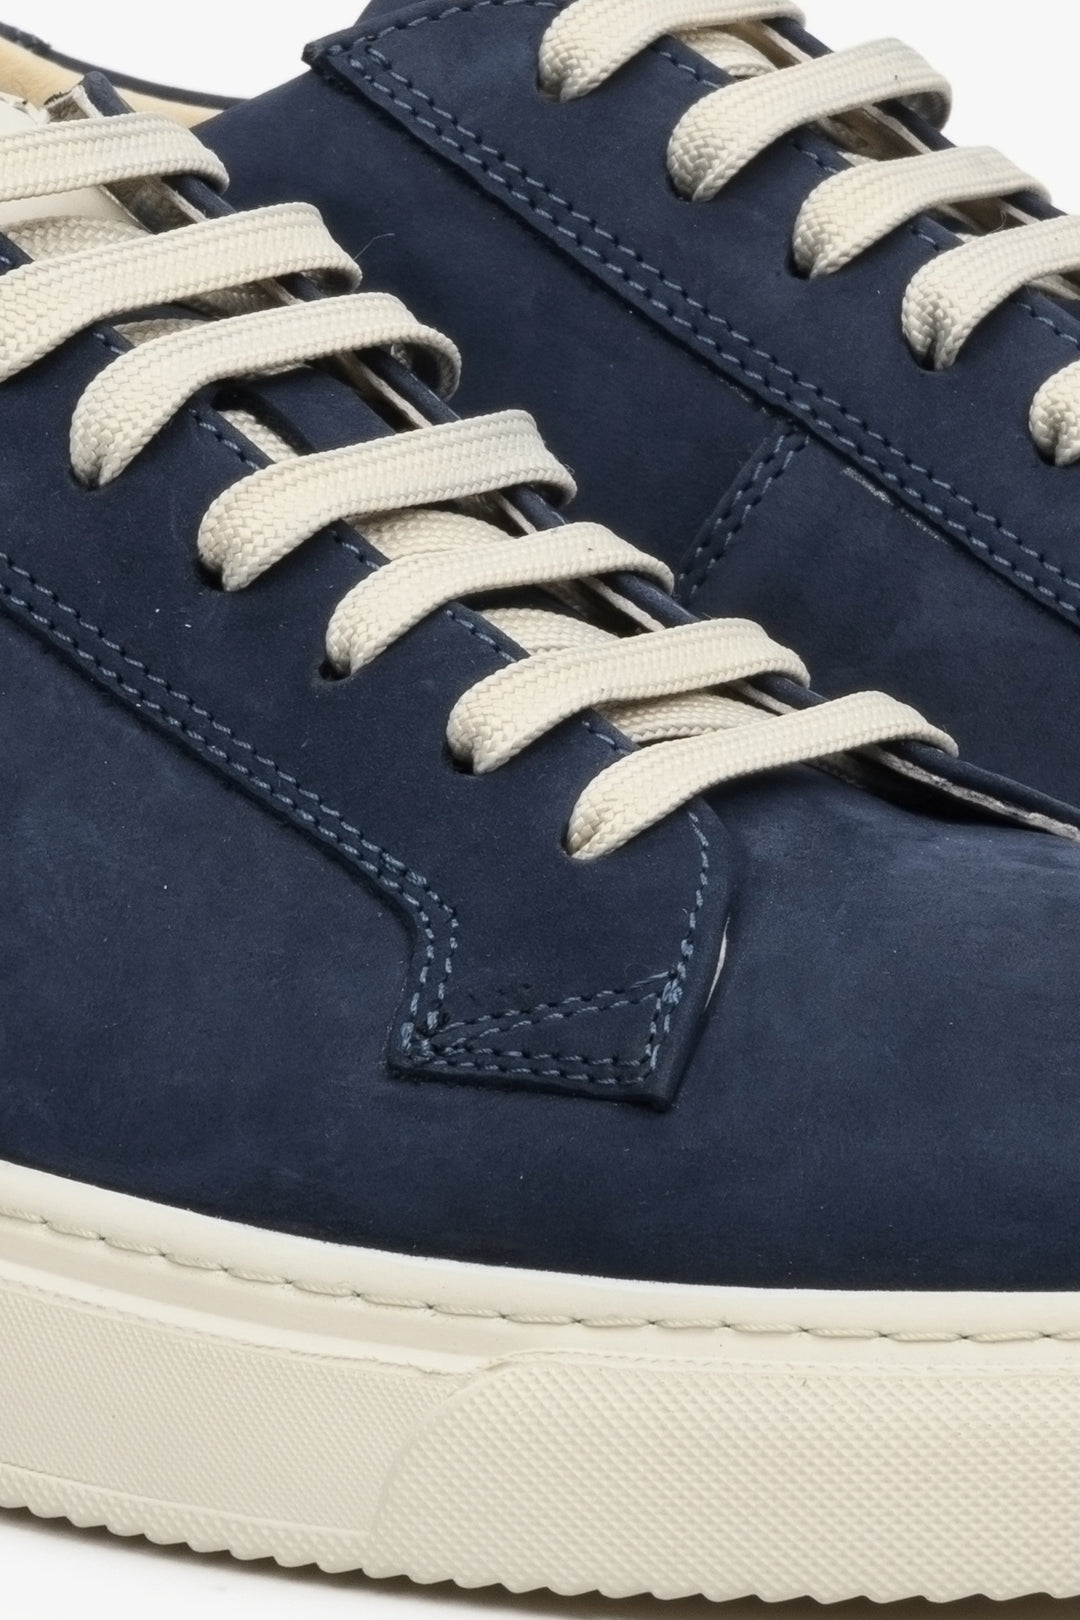 Men's navy blue nubuck sneakers for spring - a close-up of the sewing system.